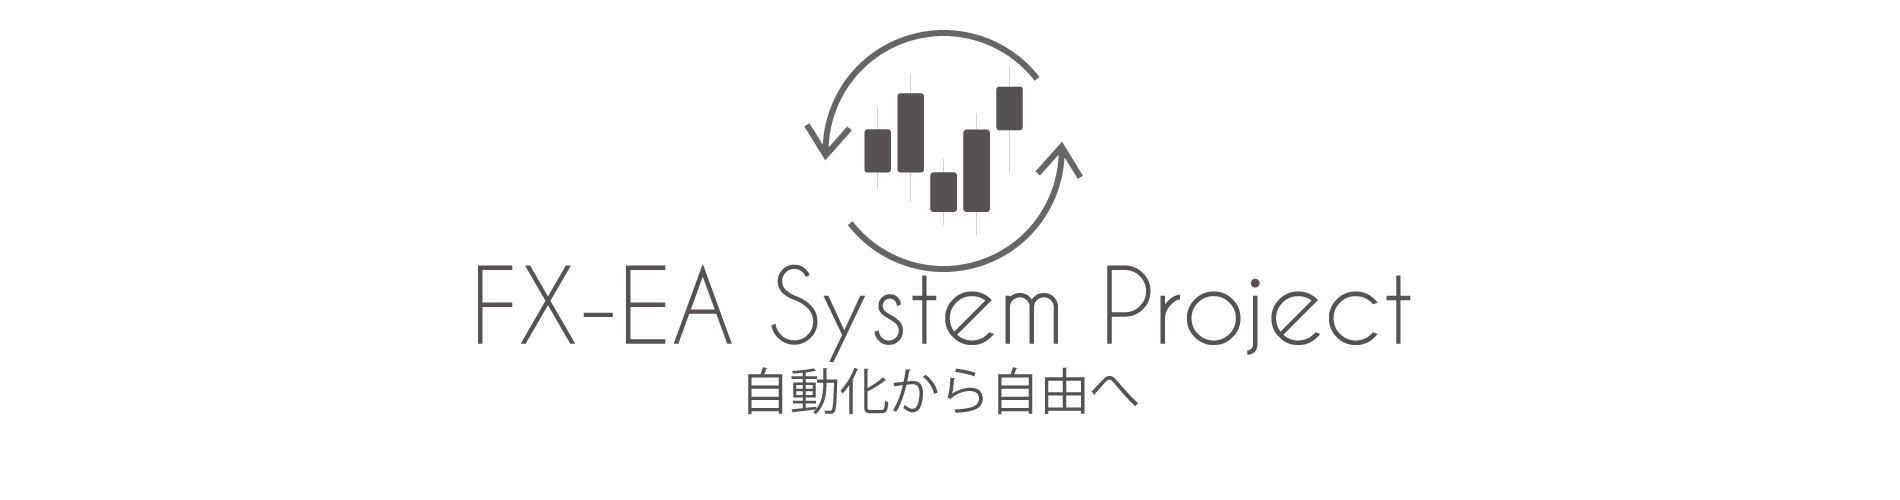 fx-ea-system-proje